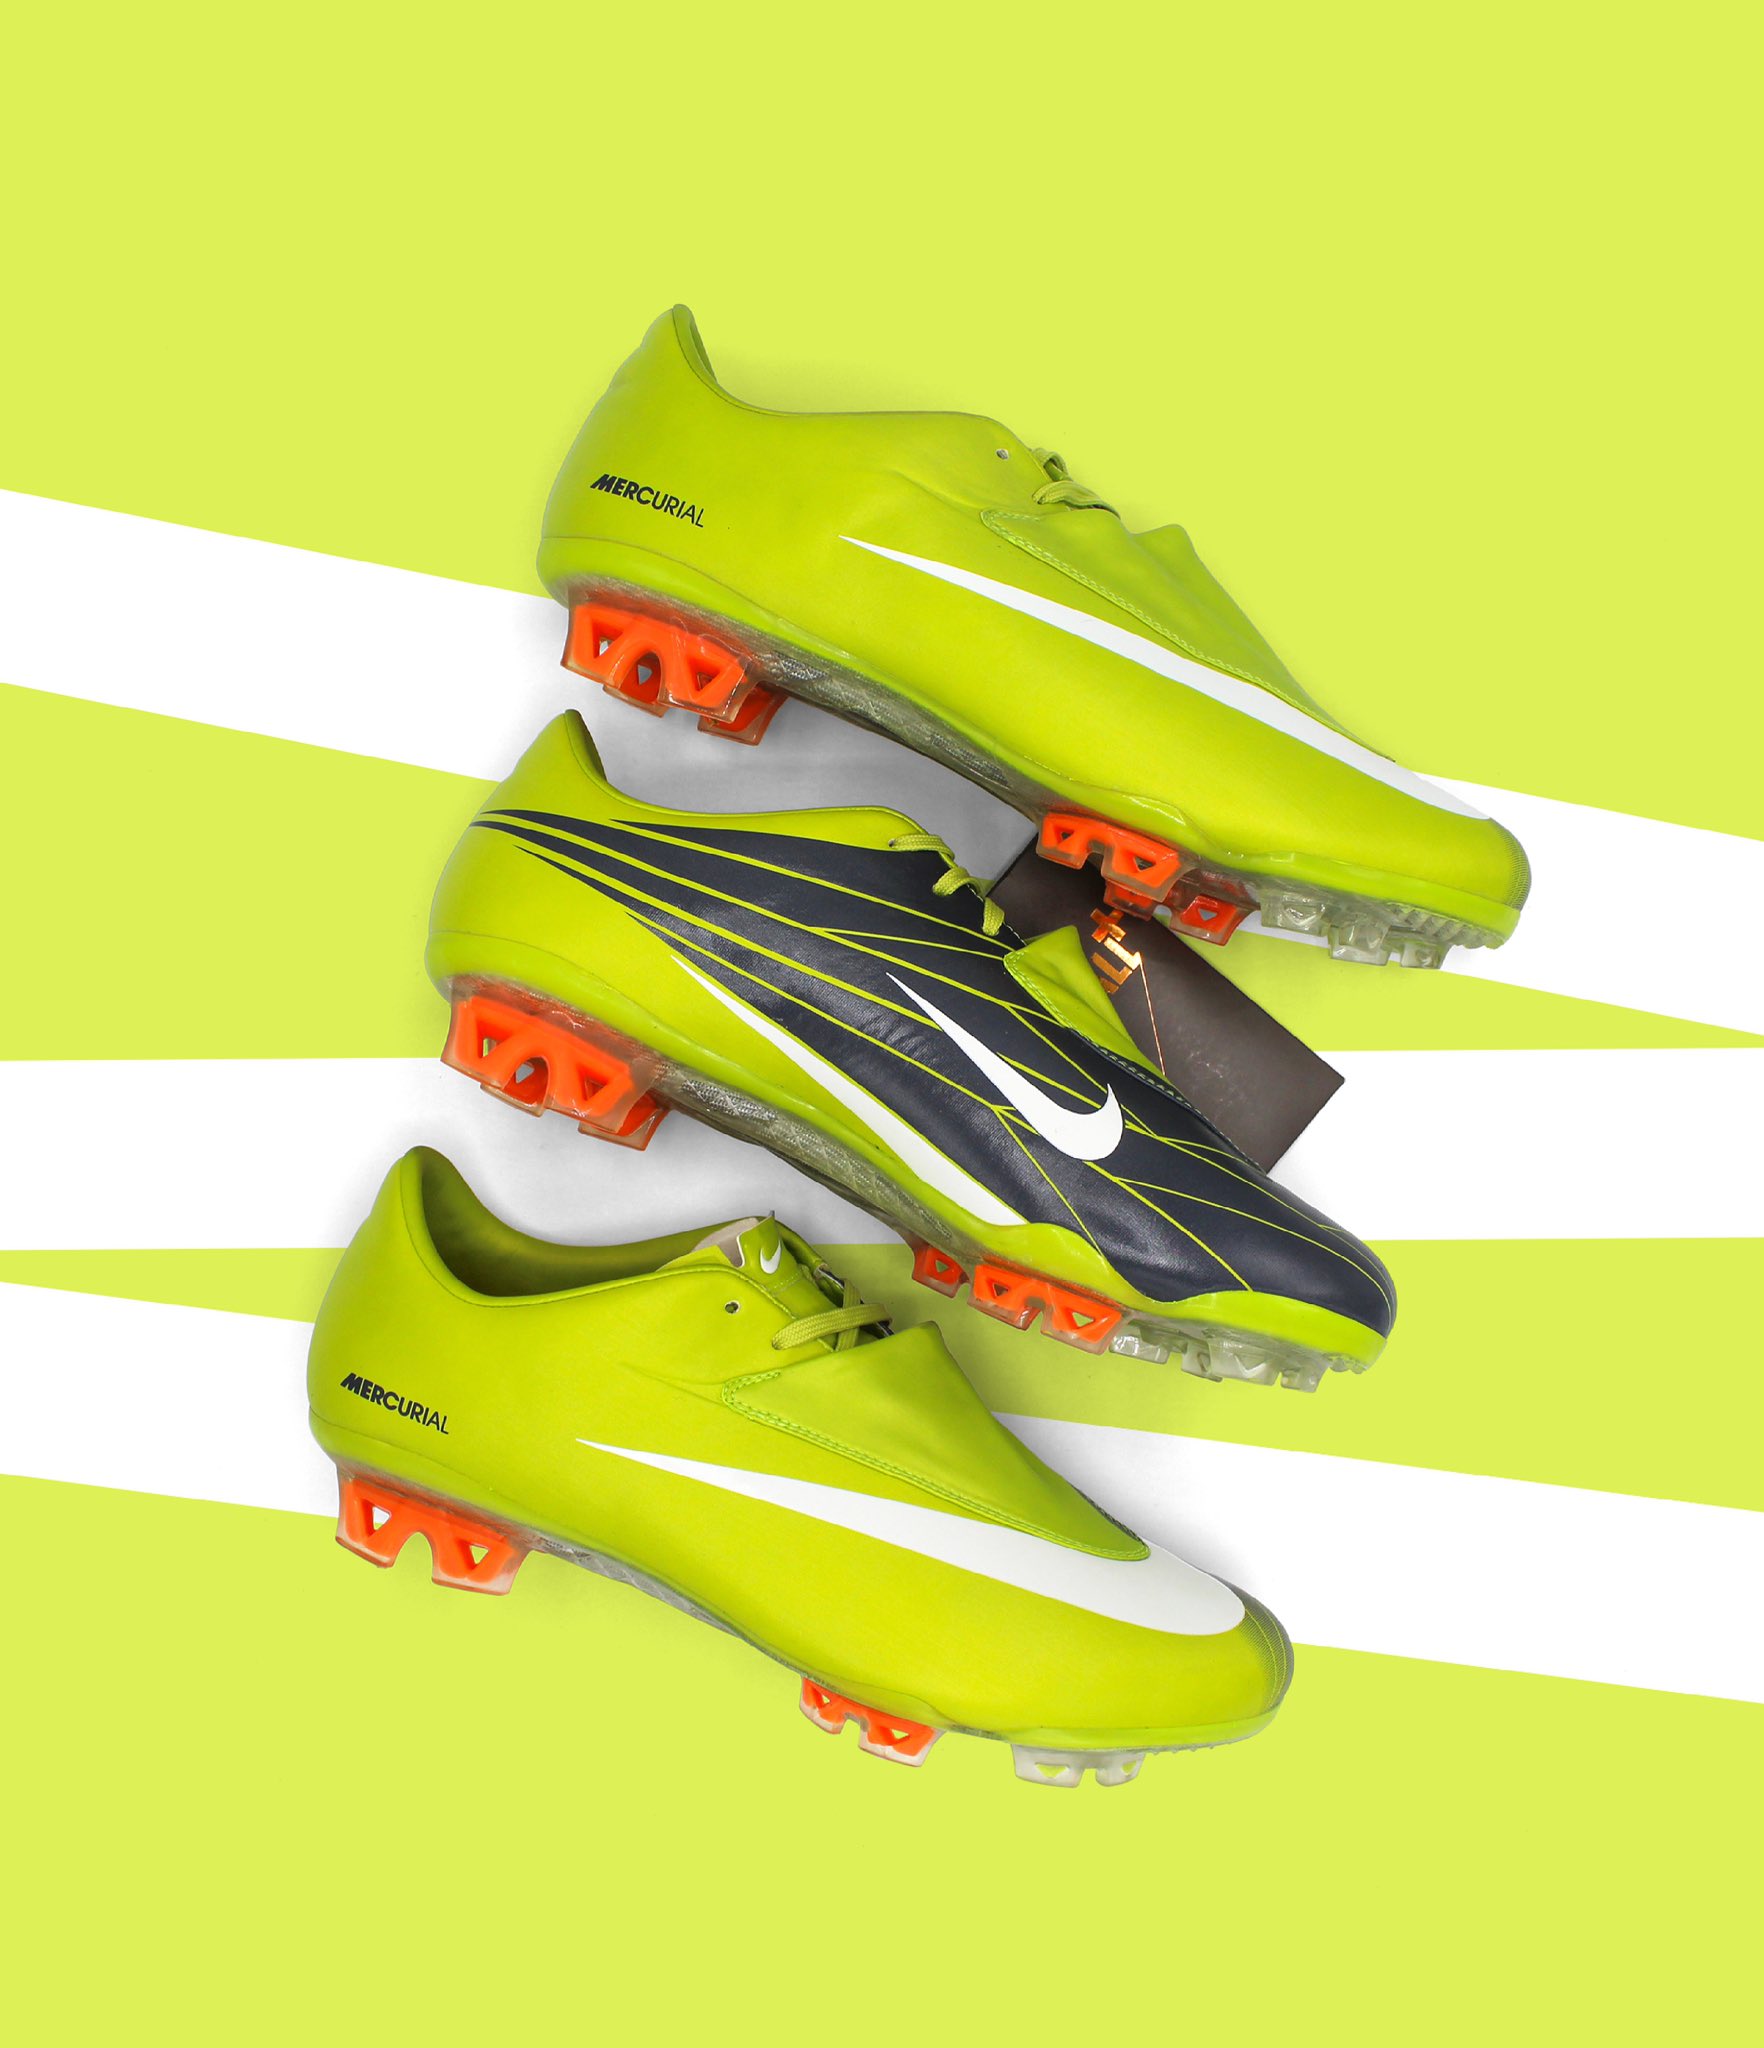 Caso Wardian Repetirse Ejecutable Classic Boots Matter on Twitter: "Back in stock 😍 Nike #Mercurial Vapor VI  Bright Cactus 🌵 Link in bio 🔗 https://t.co/89bGl5imoP" / Twitter